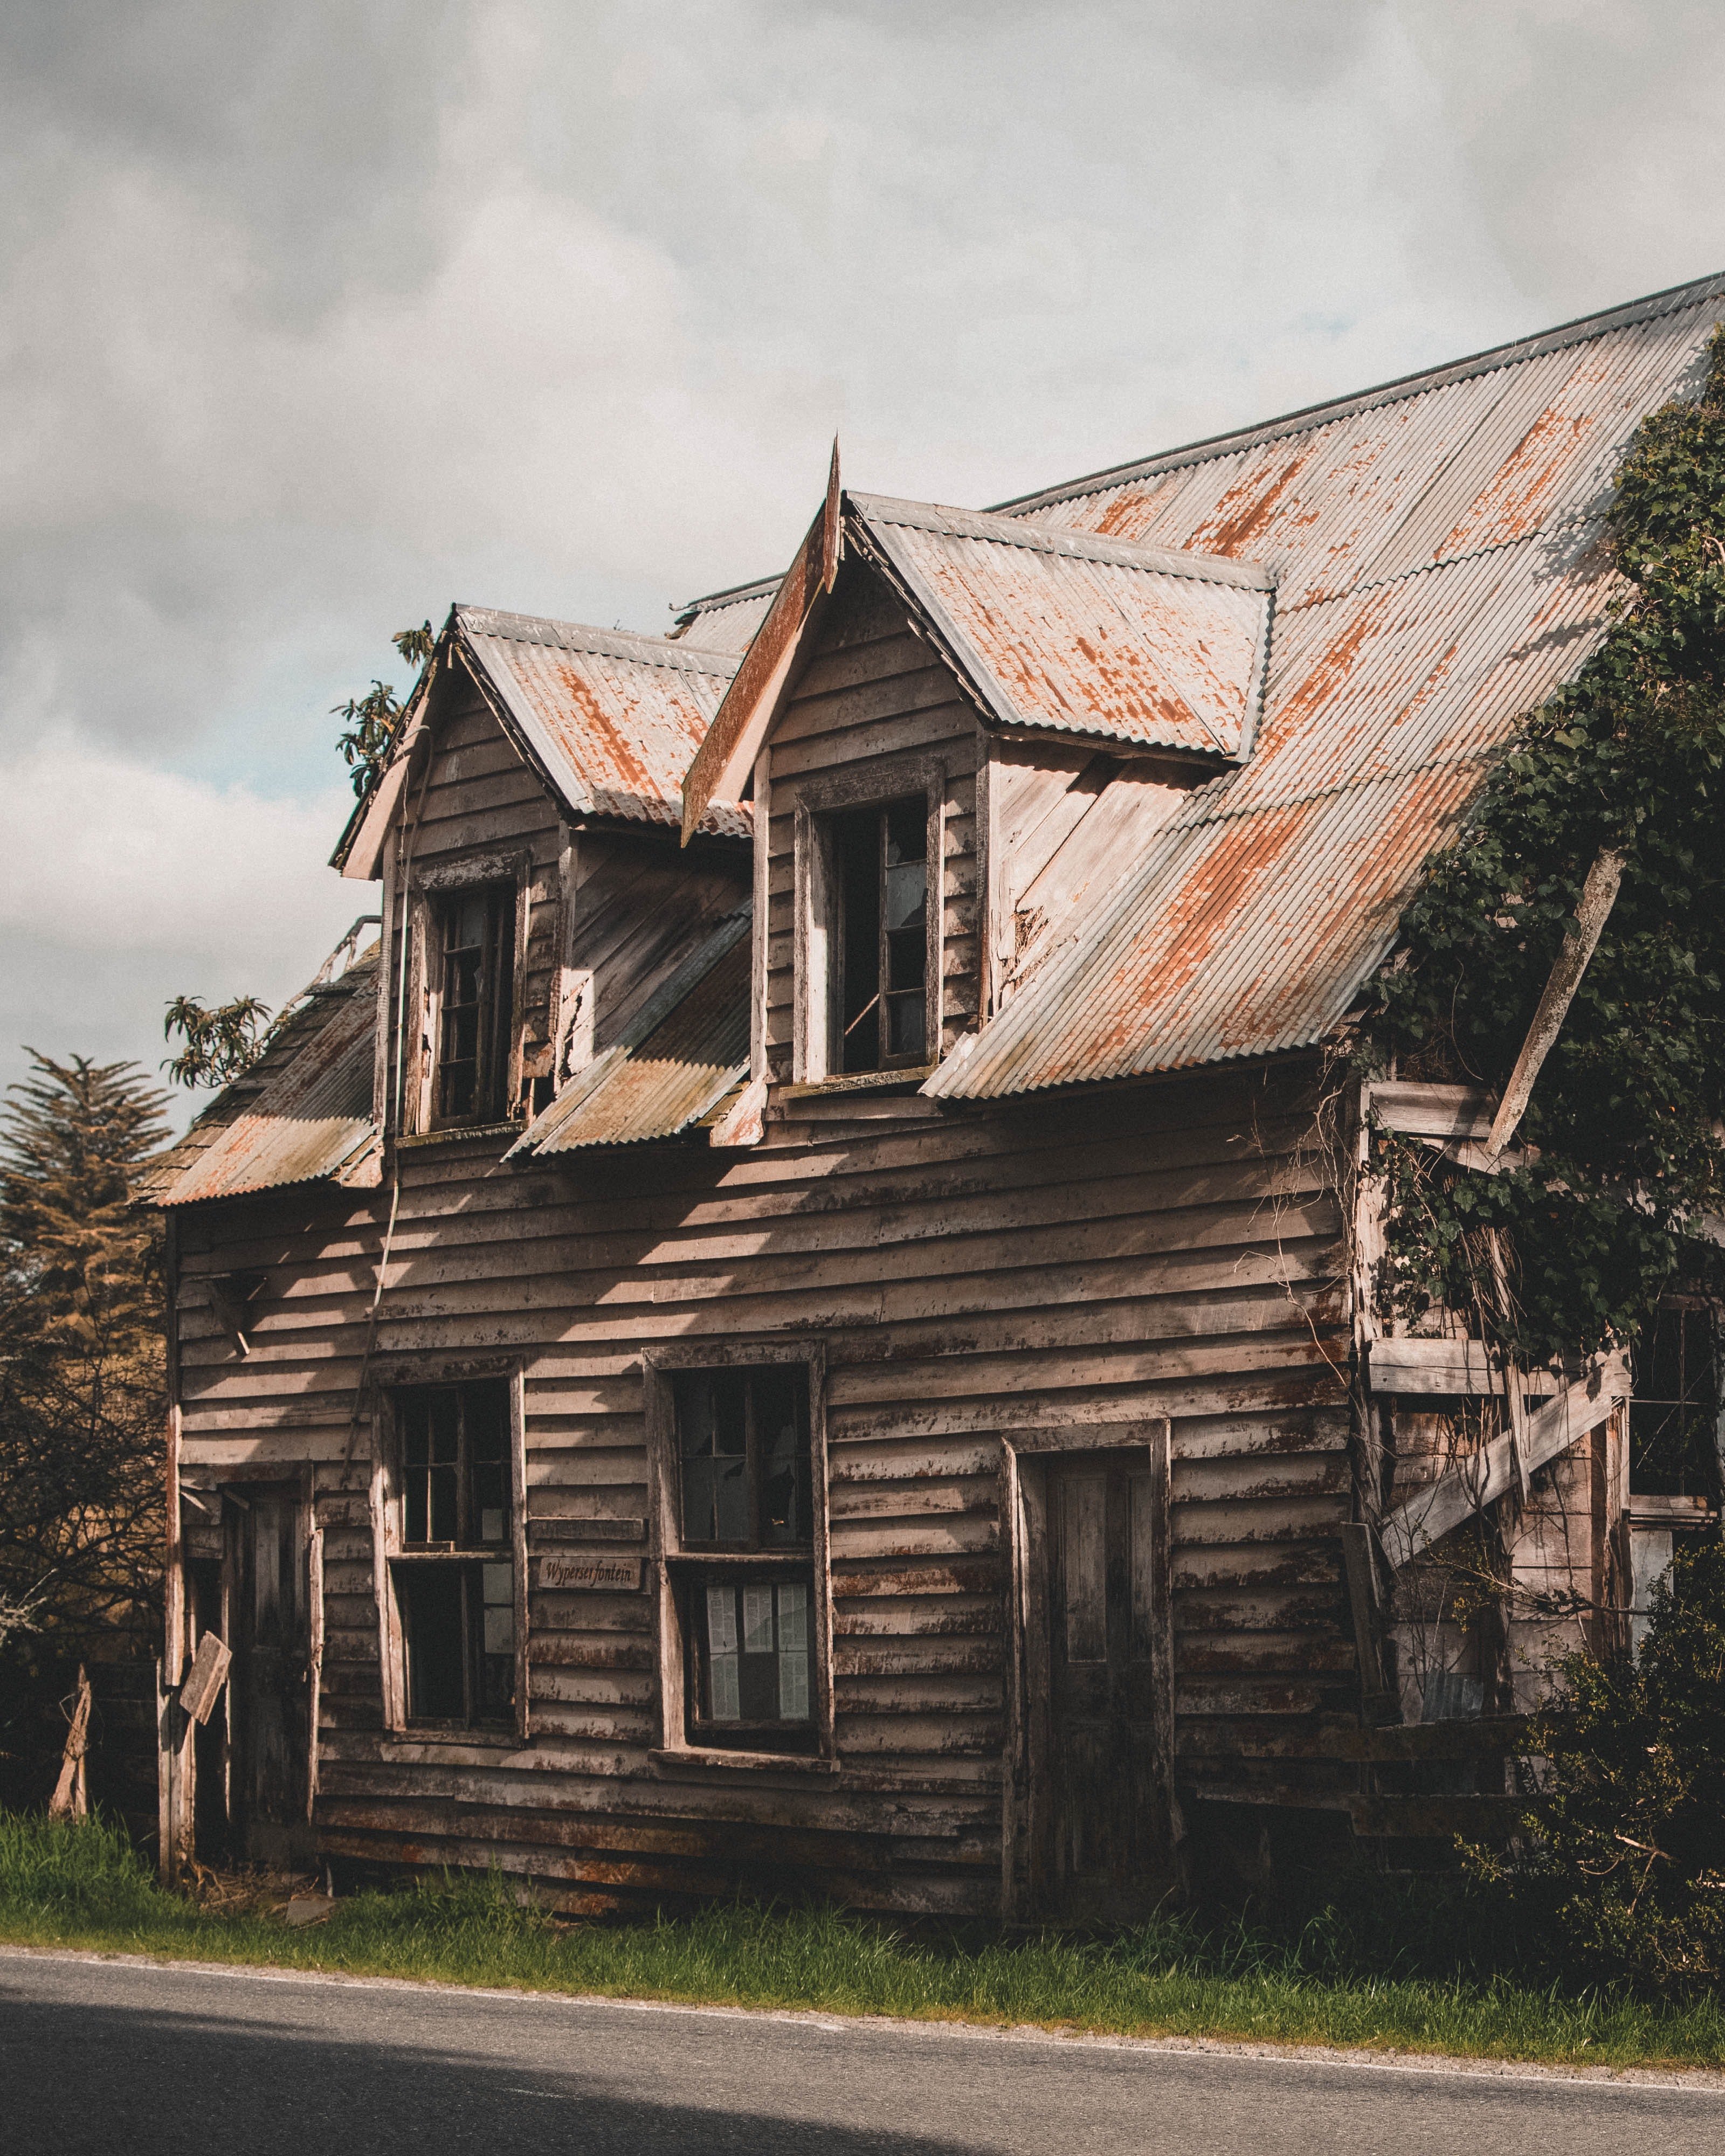 James heard loud groans from an abandoned home, and it sparked his curiosity. | Source: Pexels